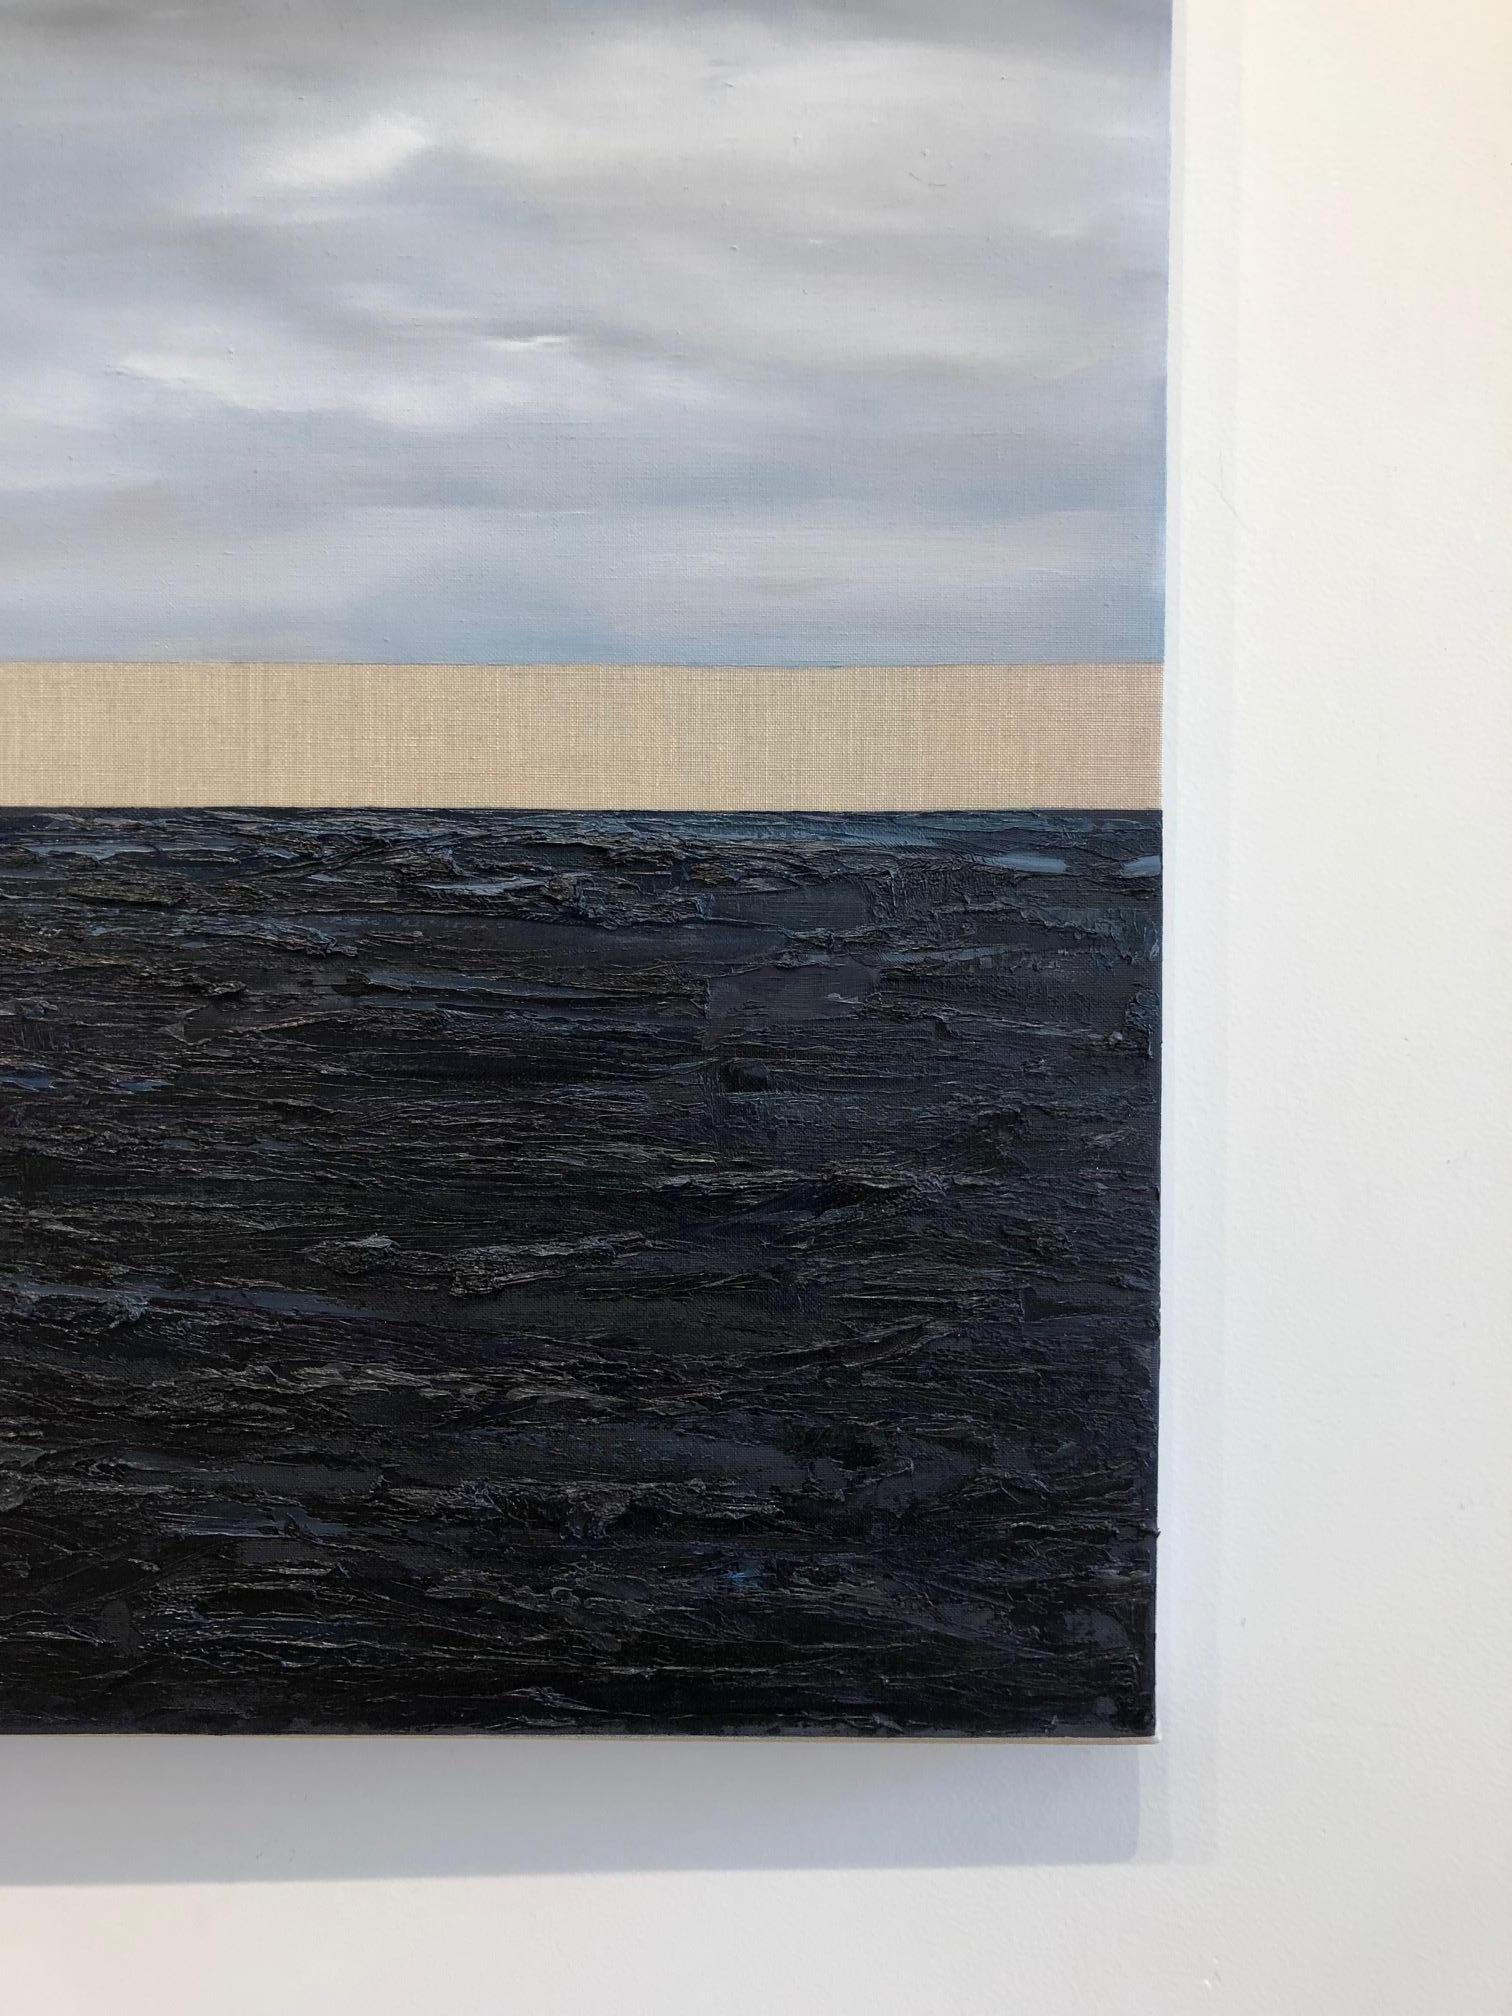 ELPIS / Hope - oil on linen, 84 x 60 inches - clouds, sea, water, grey, indigo 2